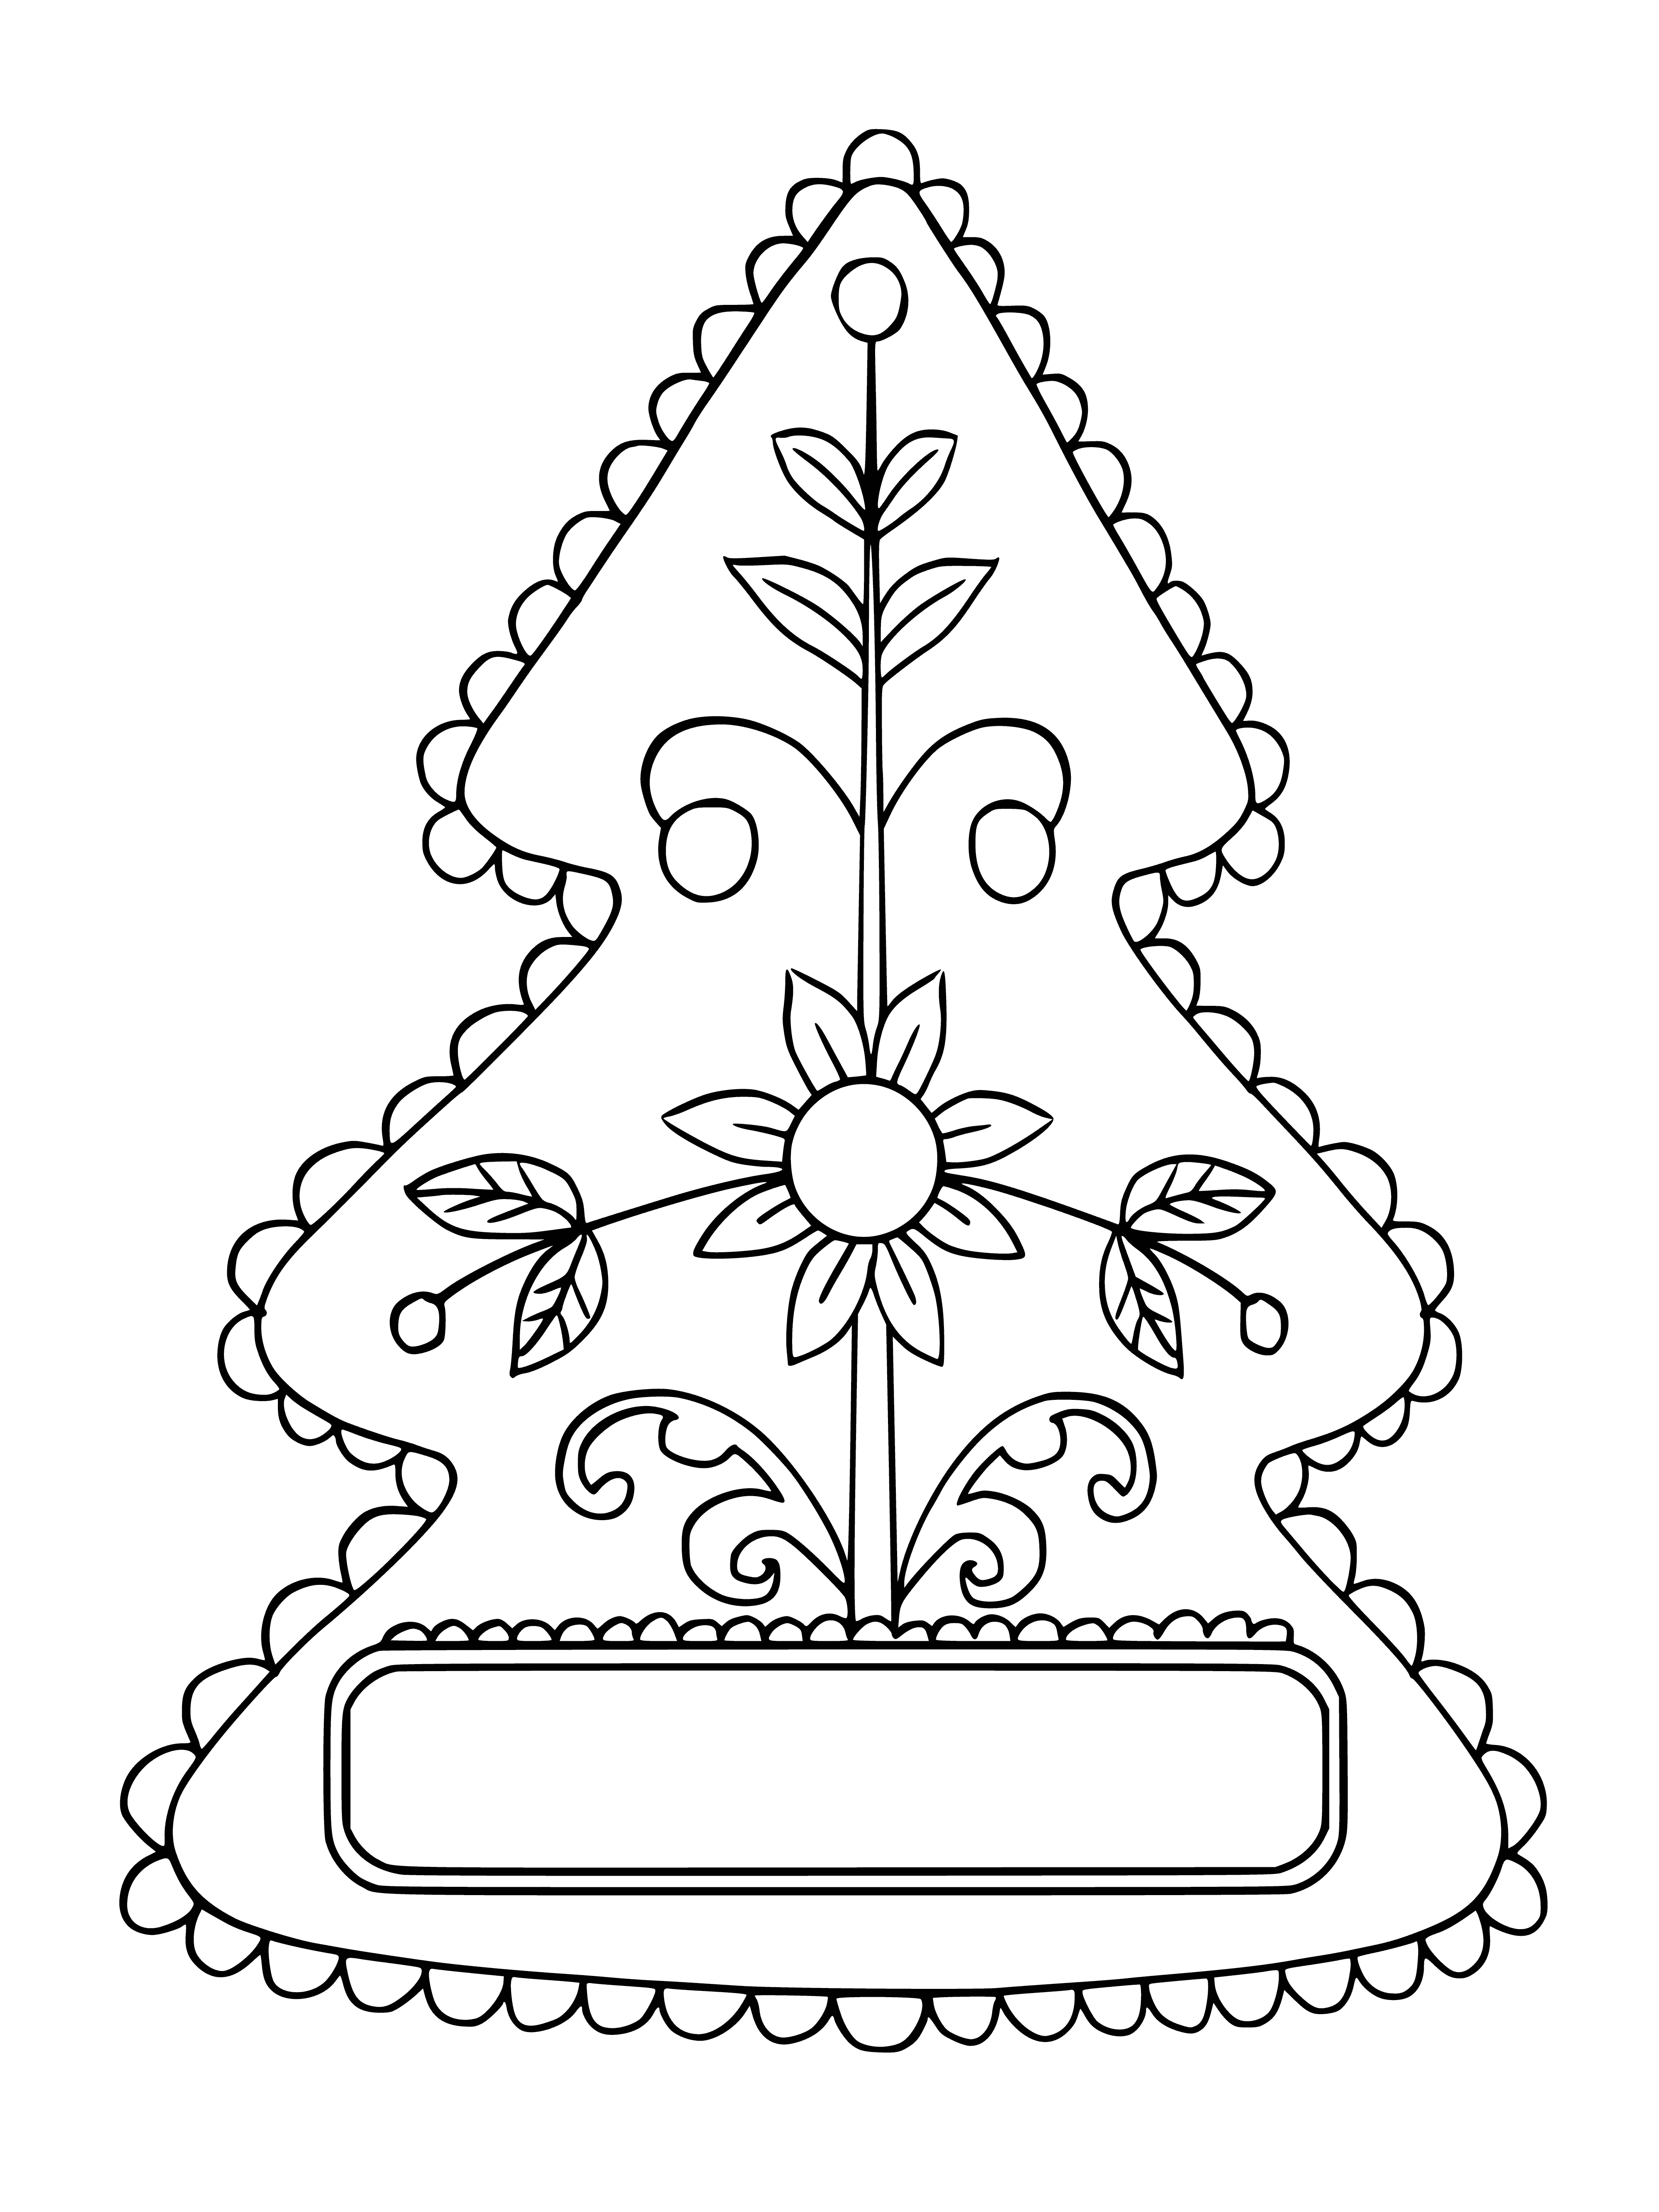 coloring page: Christmas tree of lights and presents fills center of col. pg while ppl in snow walk in bg.